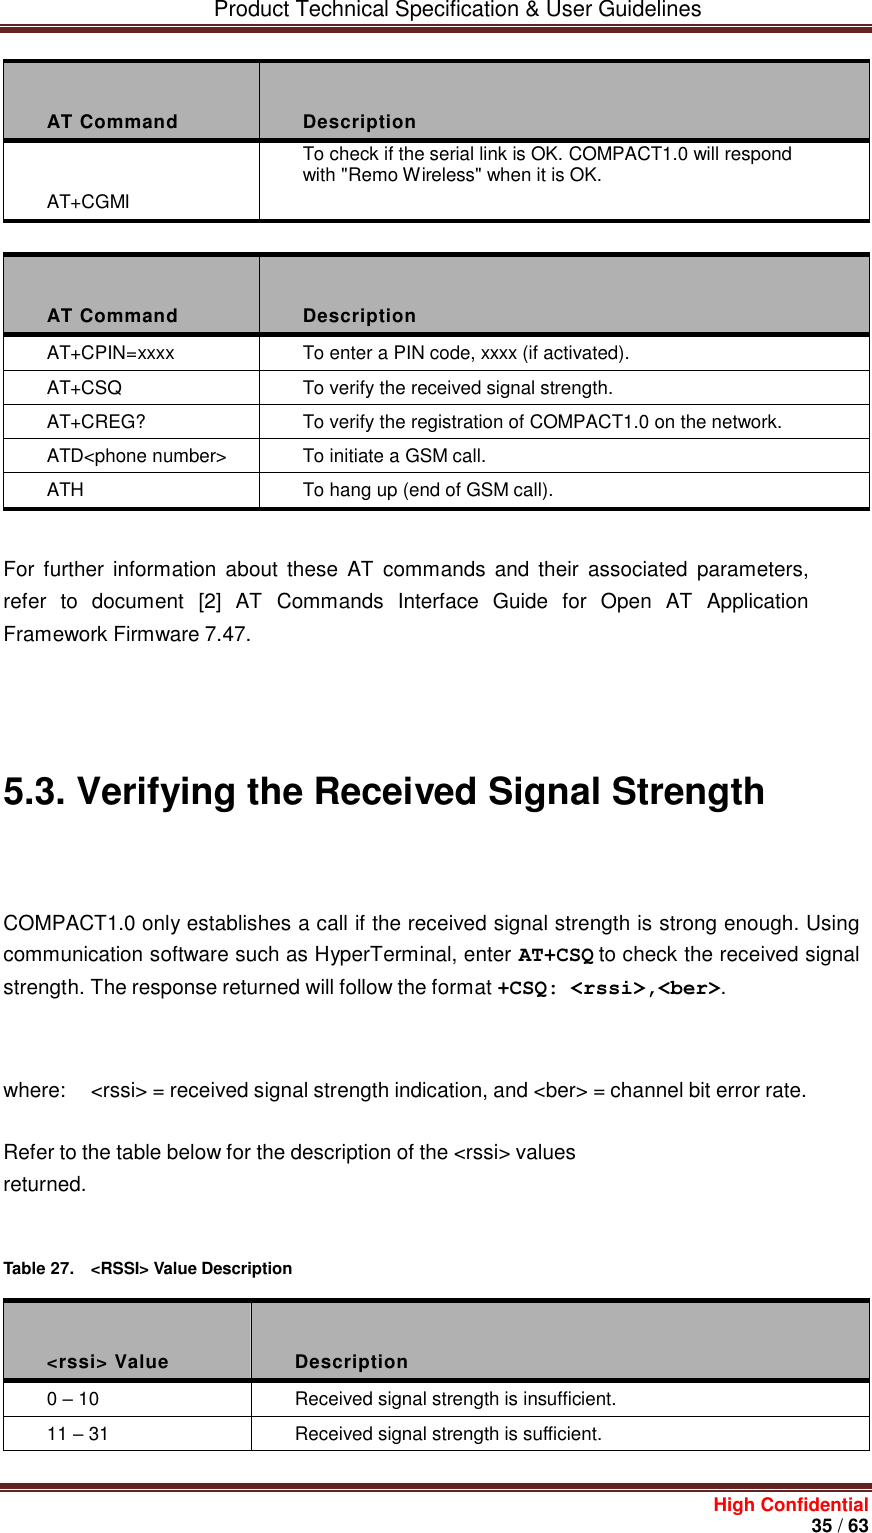         Product Technical Specification &amp; User Guidelines     High Confidential       35 / 63   AT Command  Description  AT+CGMI To check if the serial link is OK. COMPACT1.0 will respond with &quot;Remo Wireless&quot; when it is OK.   AT Command  Description AT+CPIN=xxxx To enter a PIN code, xxxx (if activated). AT+CSQ To verify the received signal strength. AT+CREG? To verify the registration of COMPACT1.0 on the network. ATD&lt;phone number&gt; To initiate a GSM call. ATH To hang up (end of GSM call).   For  further  information about  these  AT  commands and their  associated  parameters, refer to  document  [2]  AT  Commands  Interface  Guide  for  Open  AT  Application Framework Firmware 7.47.       5.3. Verifying the Received Signal Strength    COMPACT1.0 only establishes a call if the received signal strength is strong enough. Using communication software such as HyperTerminal, enter AT+CSQ to check the received signal strength. The response returned will follow the format +CSQ: &lt;rssi&gt;,&lt;ber&gt;.    where:  &lt;rssi&gt; = received signal strength indication, and &lt;ber&gt; = channel bit error rate. Refer to the table below for the description of the &lt;rssi&gt; values returned.    Table 27.  &lt;RSSI&gt; Value Description    &lt;rssi&gt; Value  Description 0 – 10 Received signal strength is insufficient. 11 – 31 Received signal strength is sufficient. 